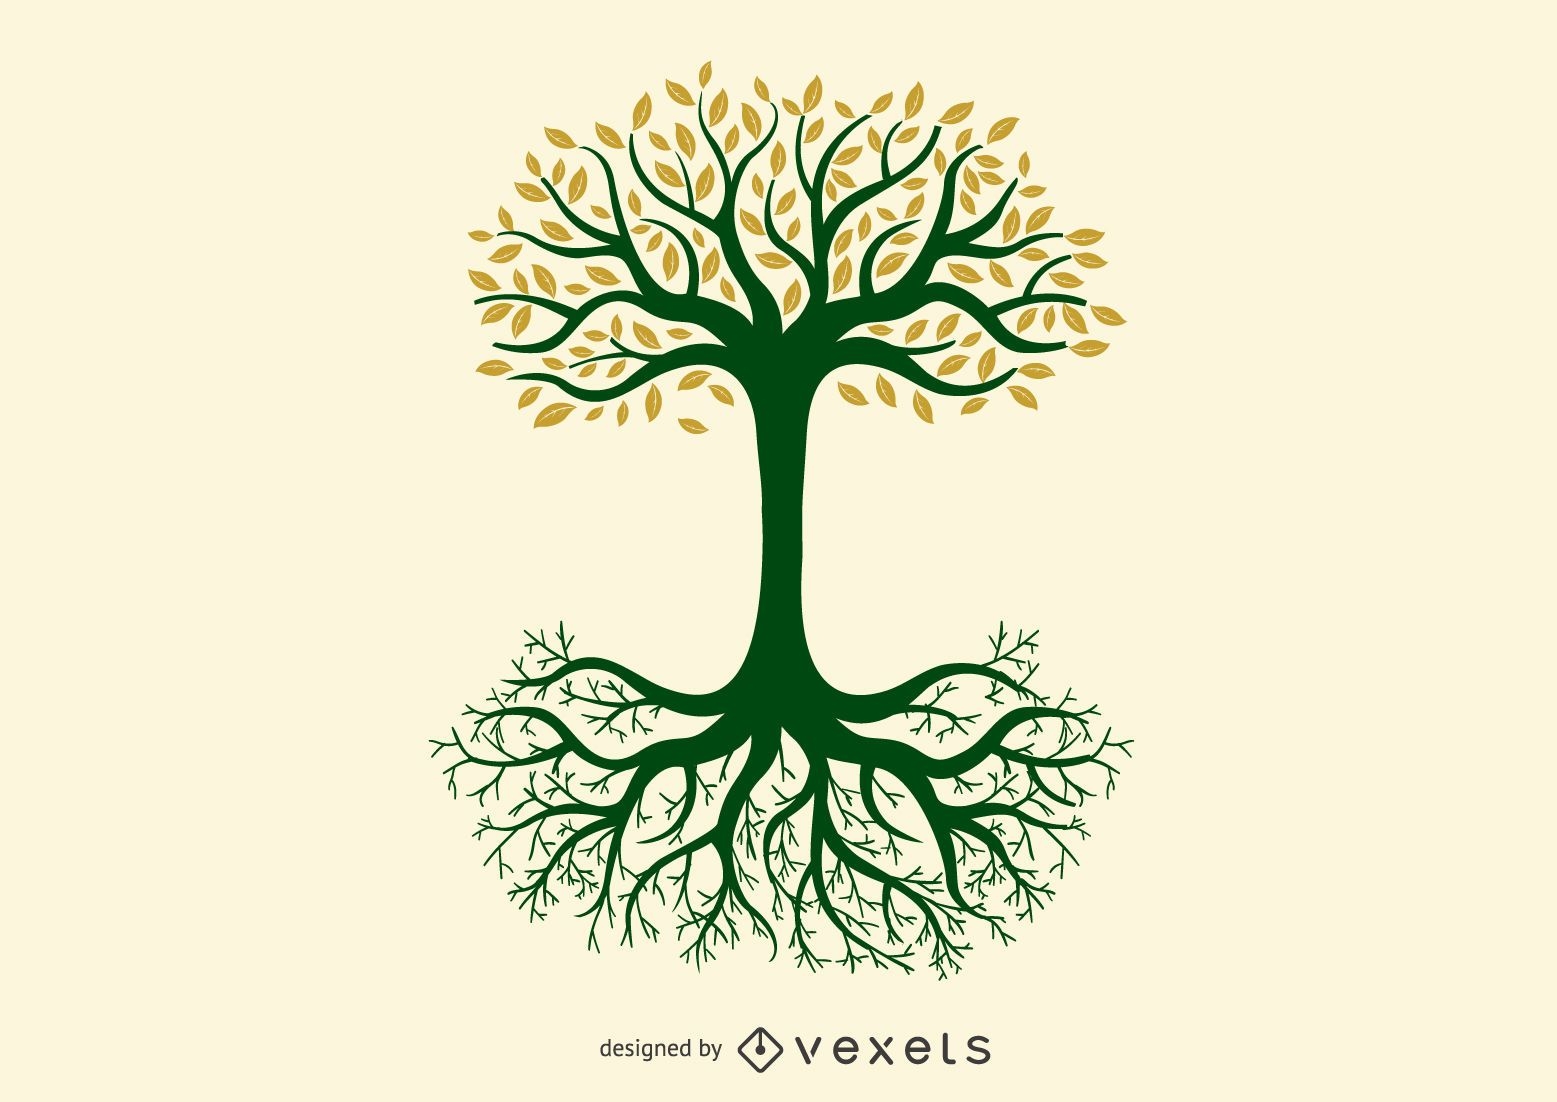 Tree of Life Yggdrasil Norse Design Gráfico